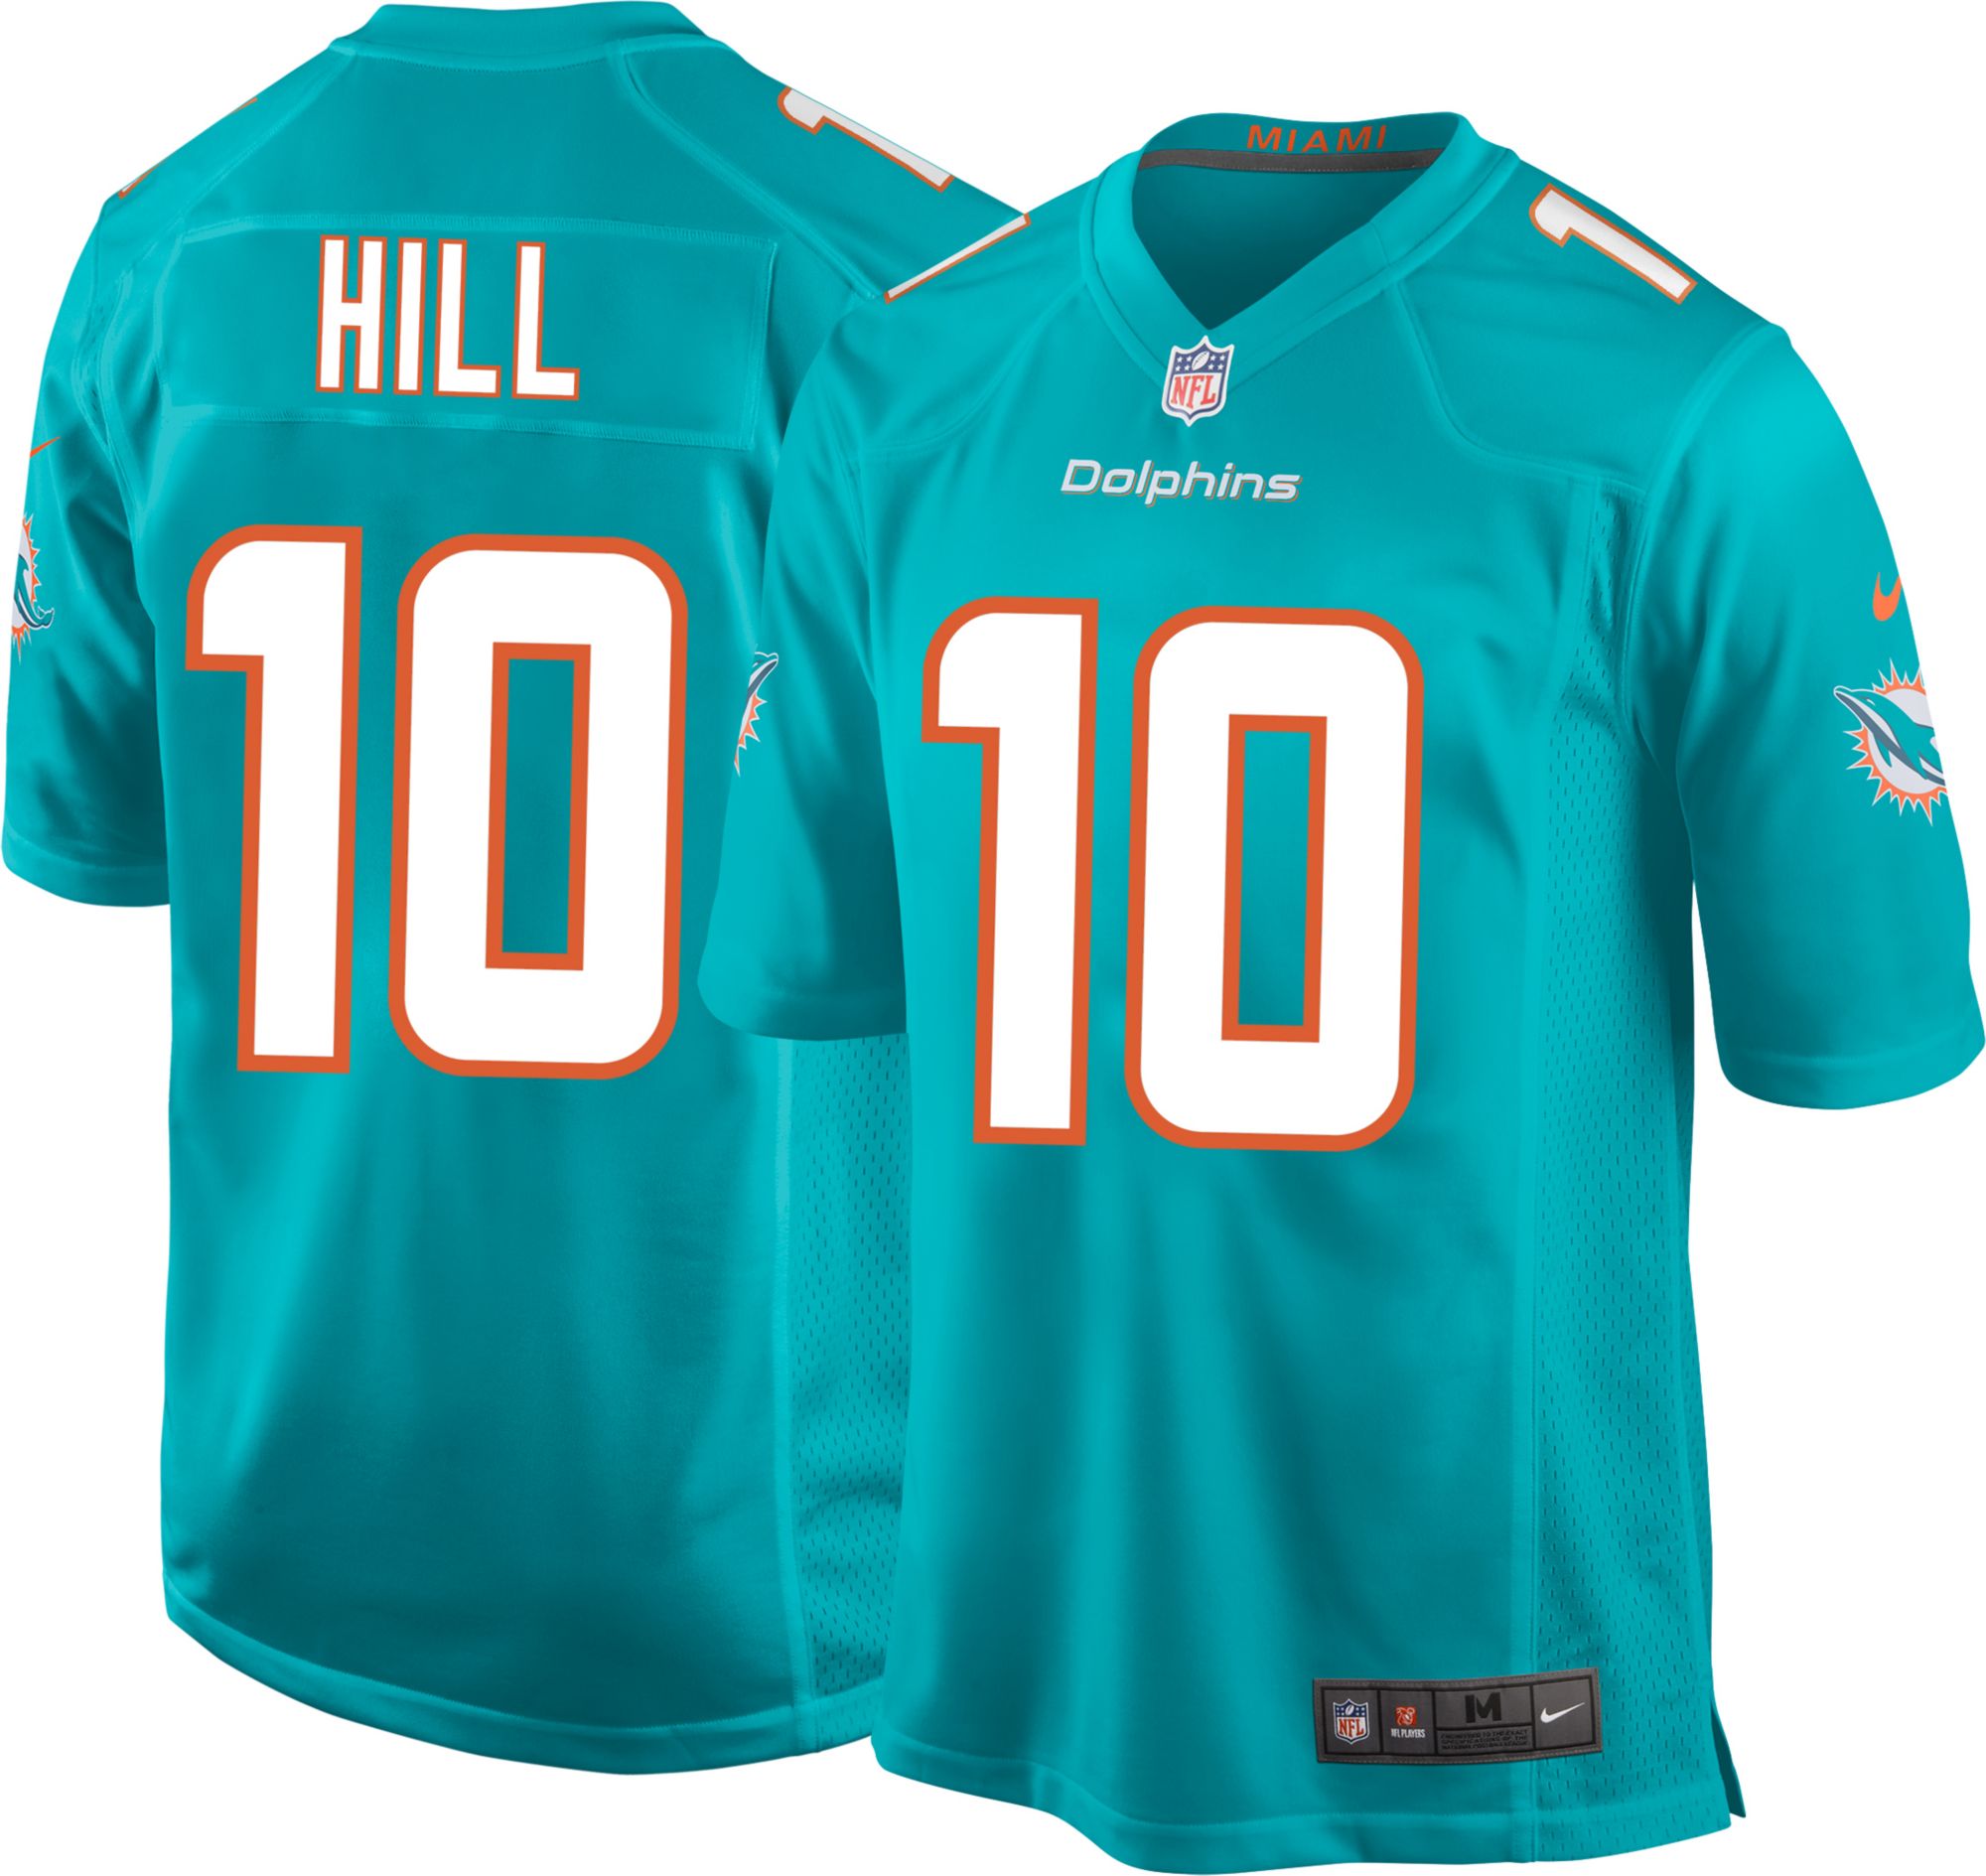 miami dolphins jersey 8